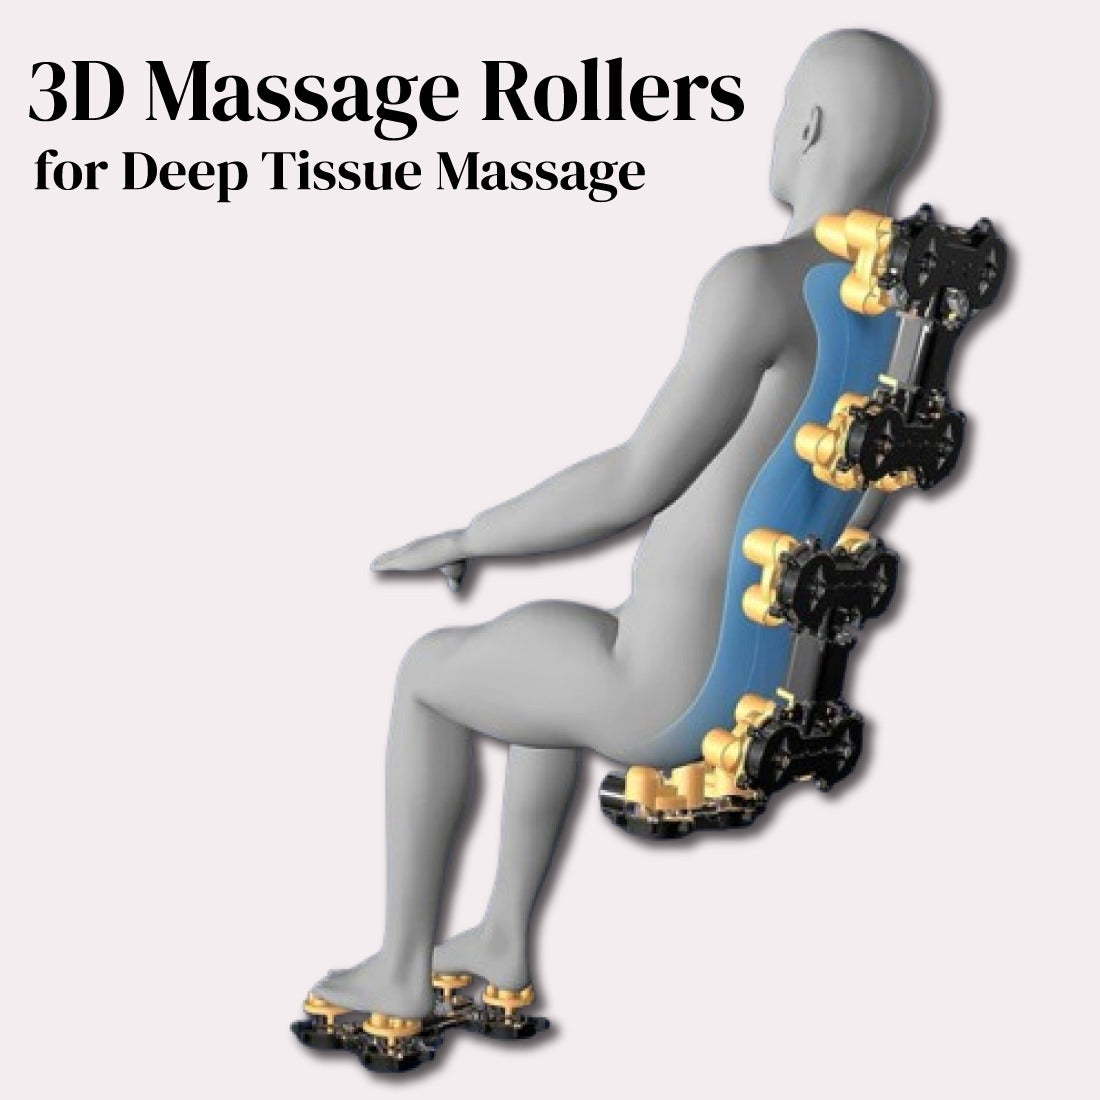 Massage Sofa Chair with 3D massage rollers